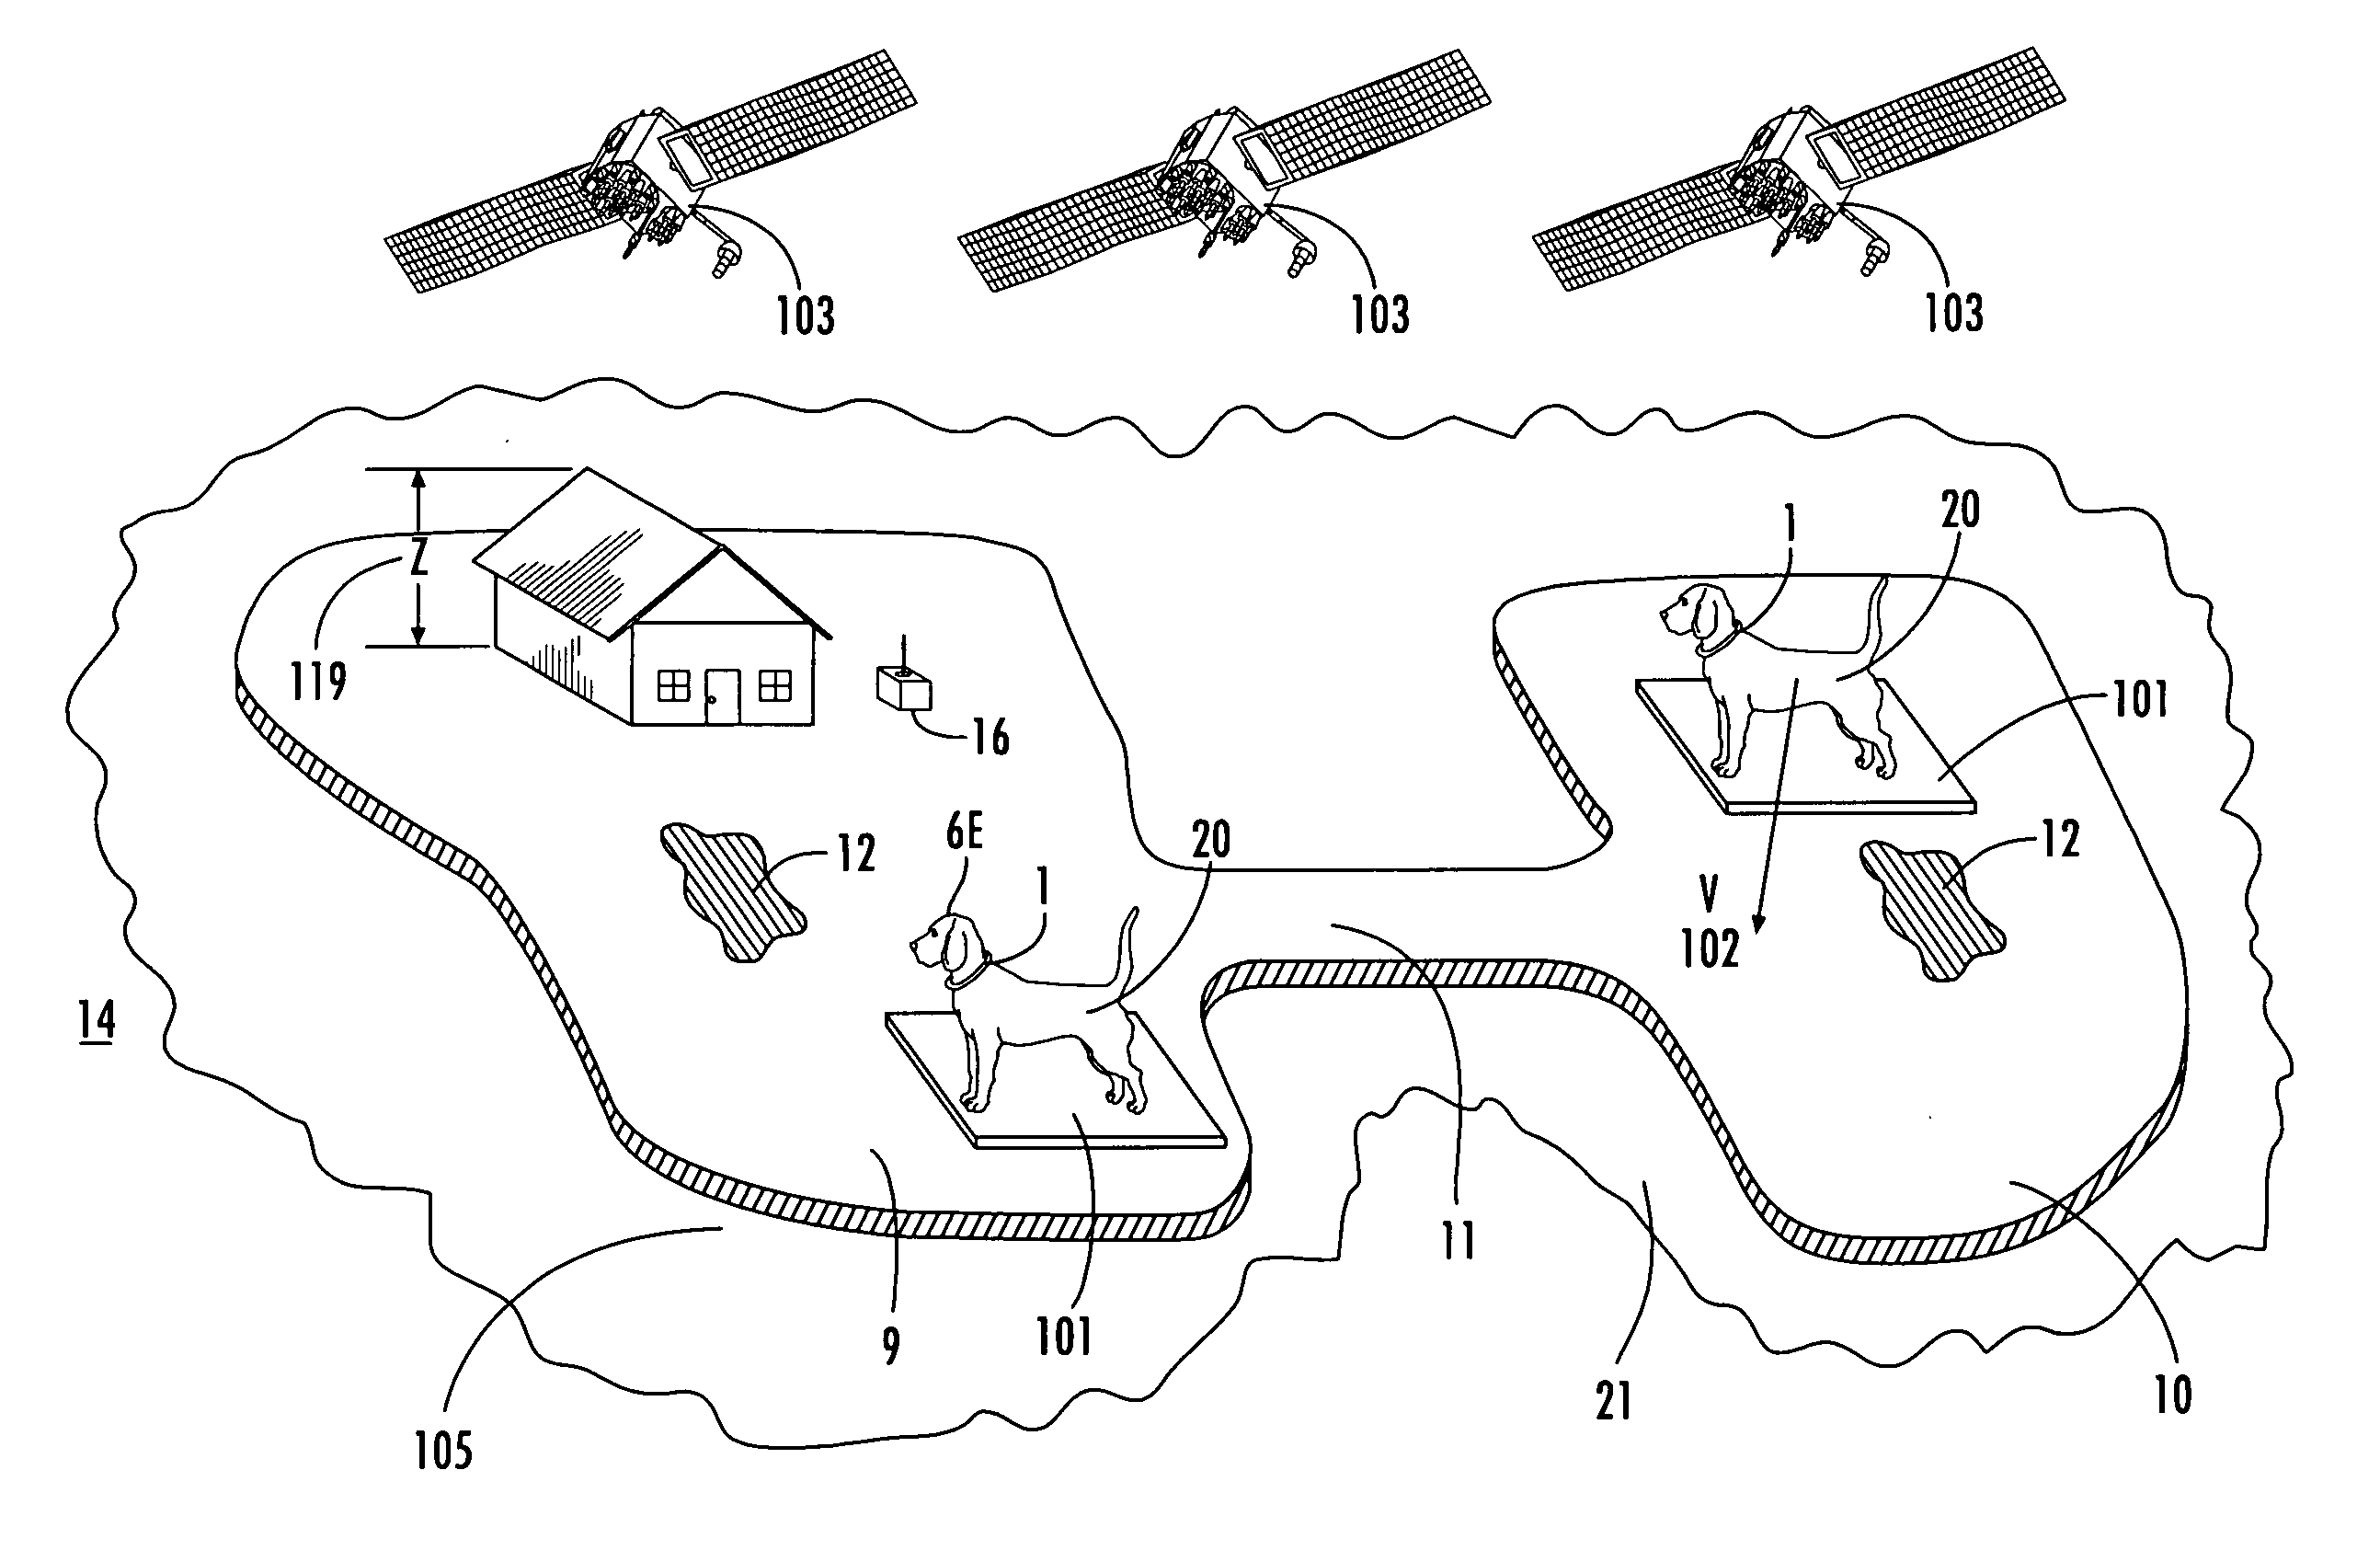 Large area position/proximity correction device with alarms using (D)GPS technology